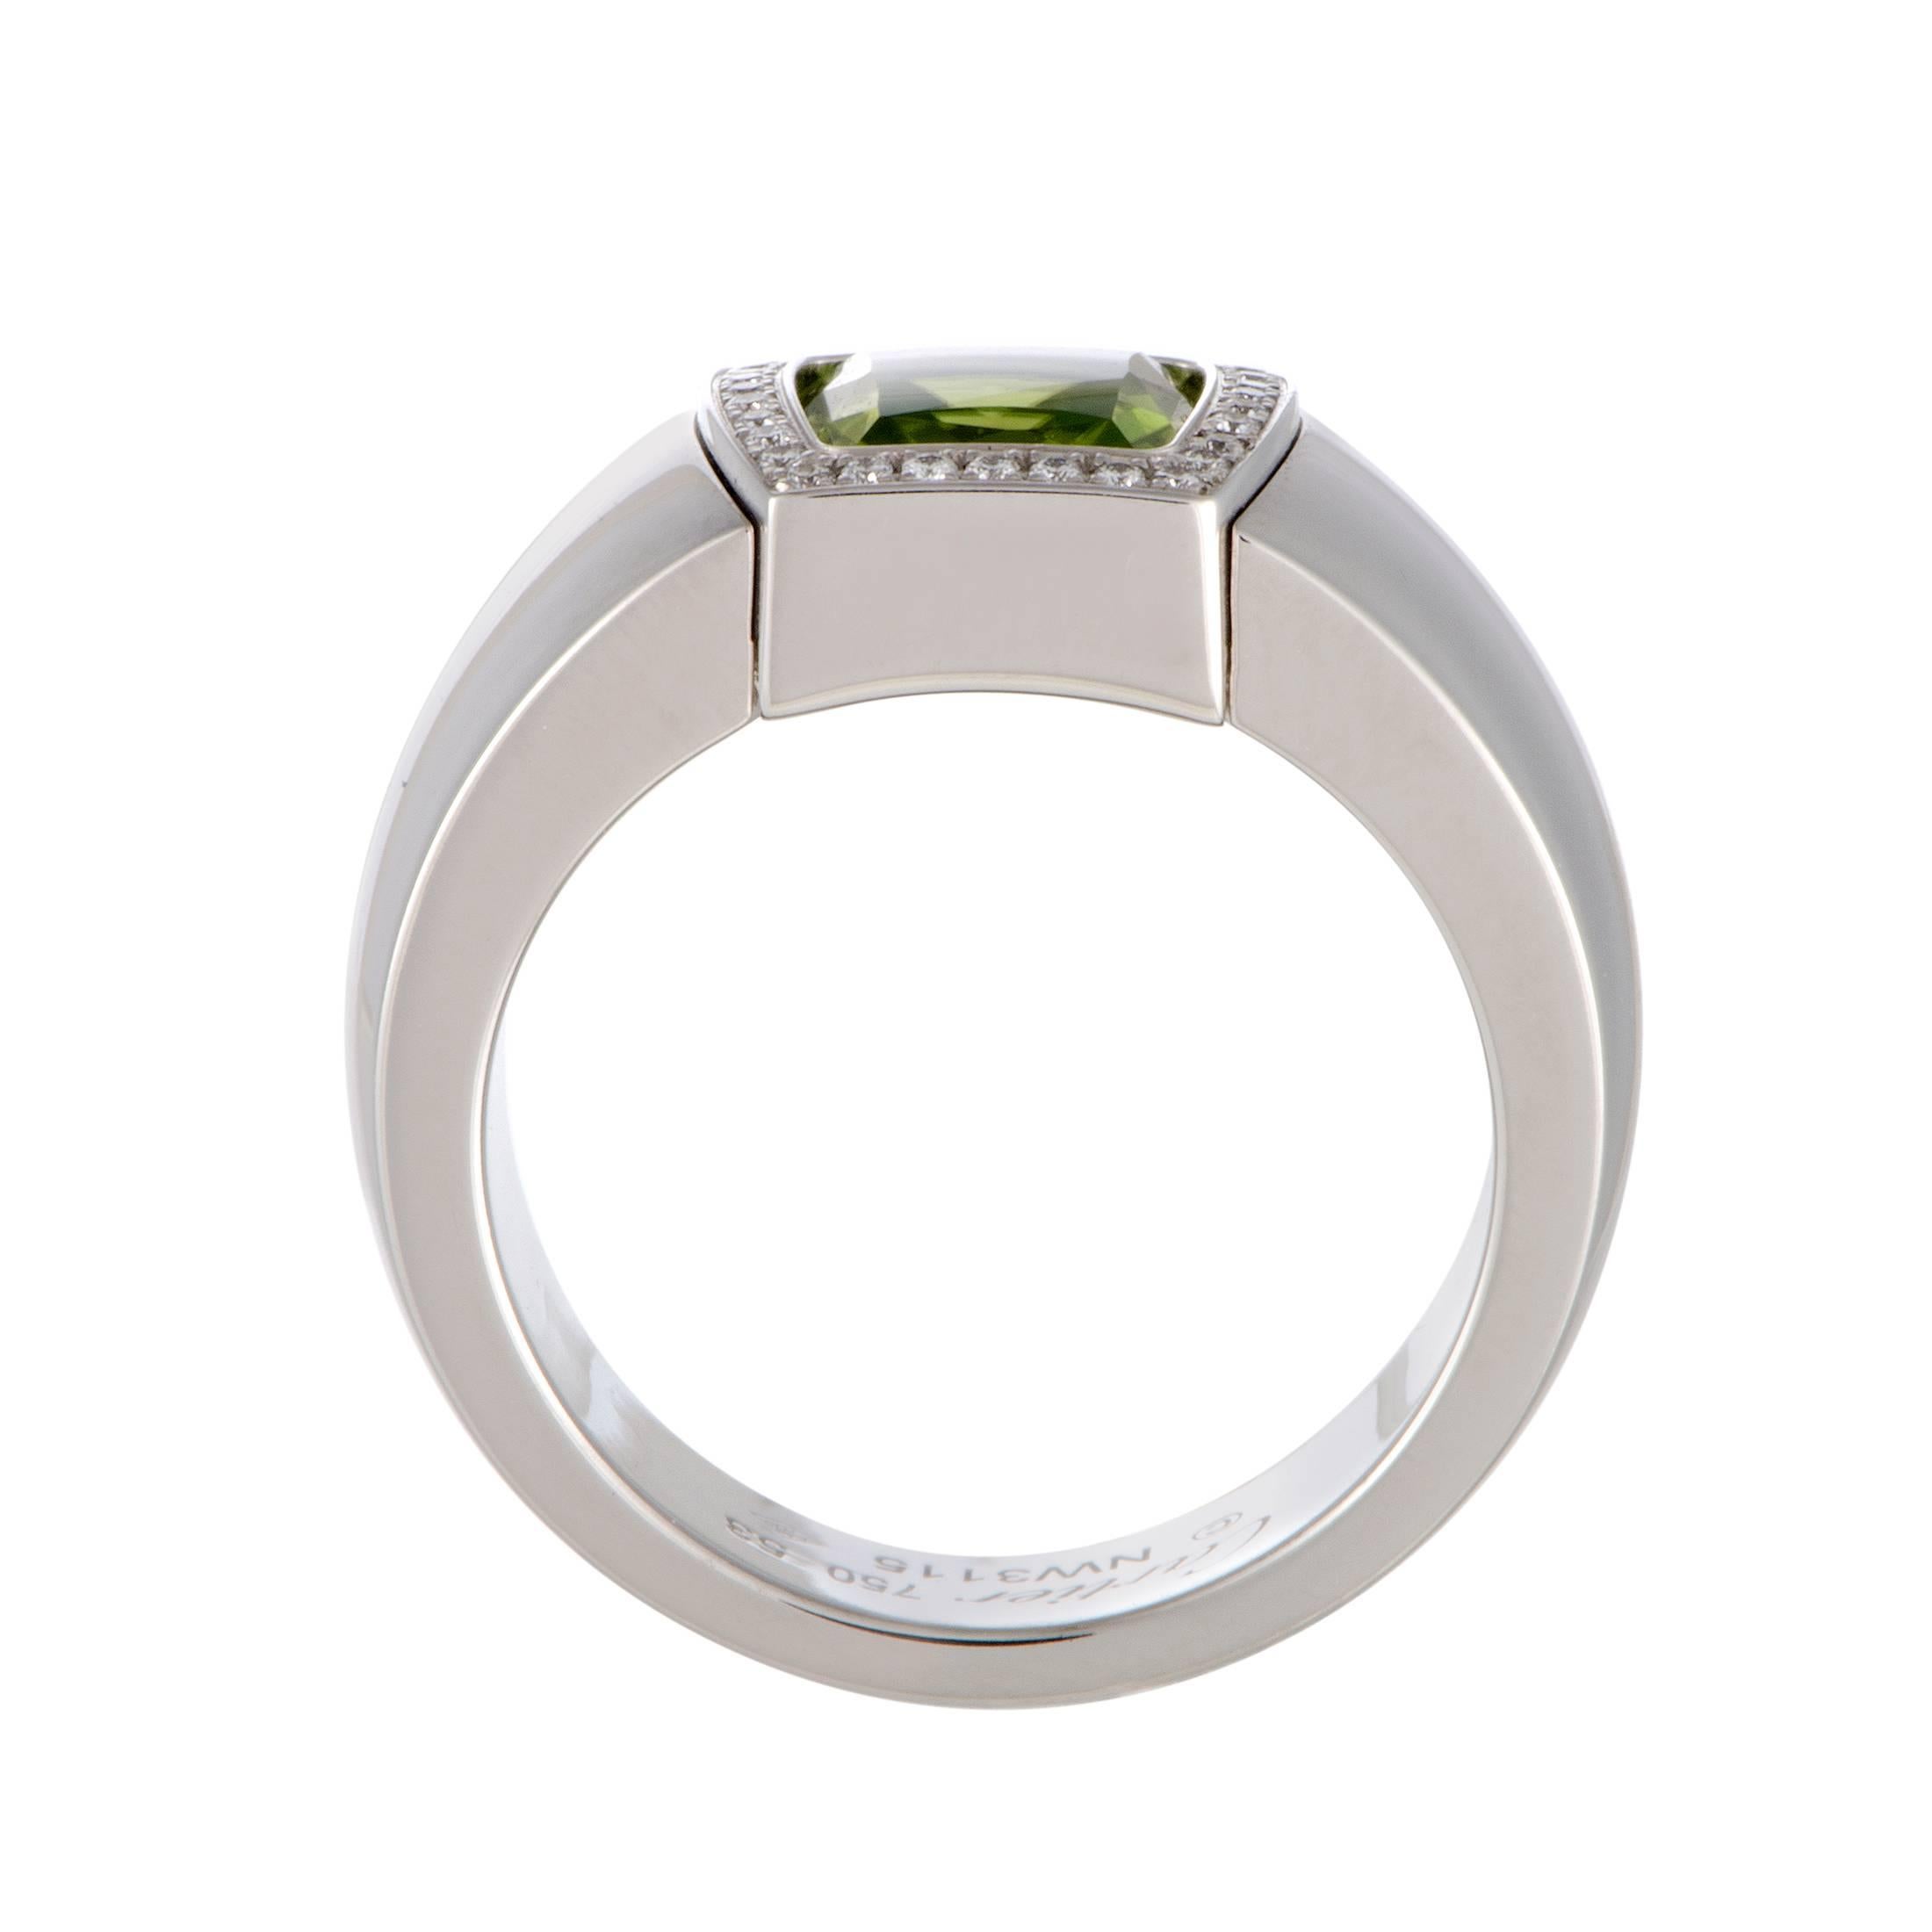 Evoking images of the emblematic shape characteristic for the famous La Dona collection, this sublime ring from Cartier boasts glistening peridot and scintillating diamonds against impeccably polished 18K white gold.
Ring Size: 6.75
Ring Top